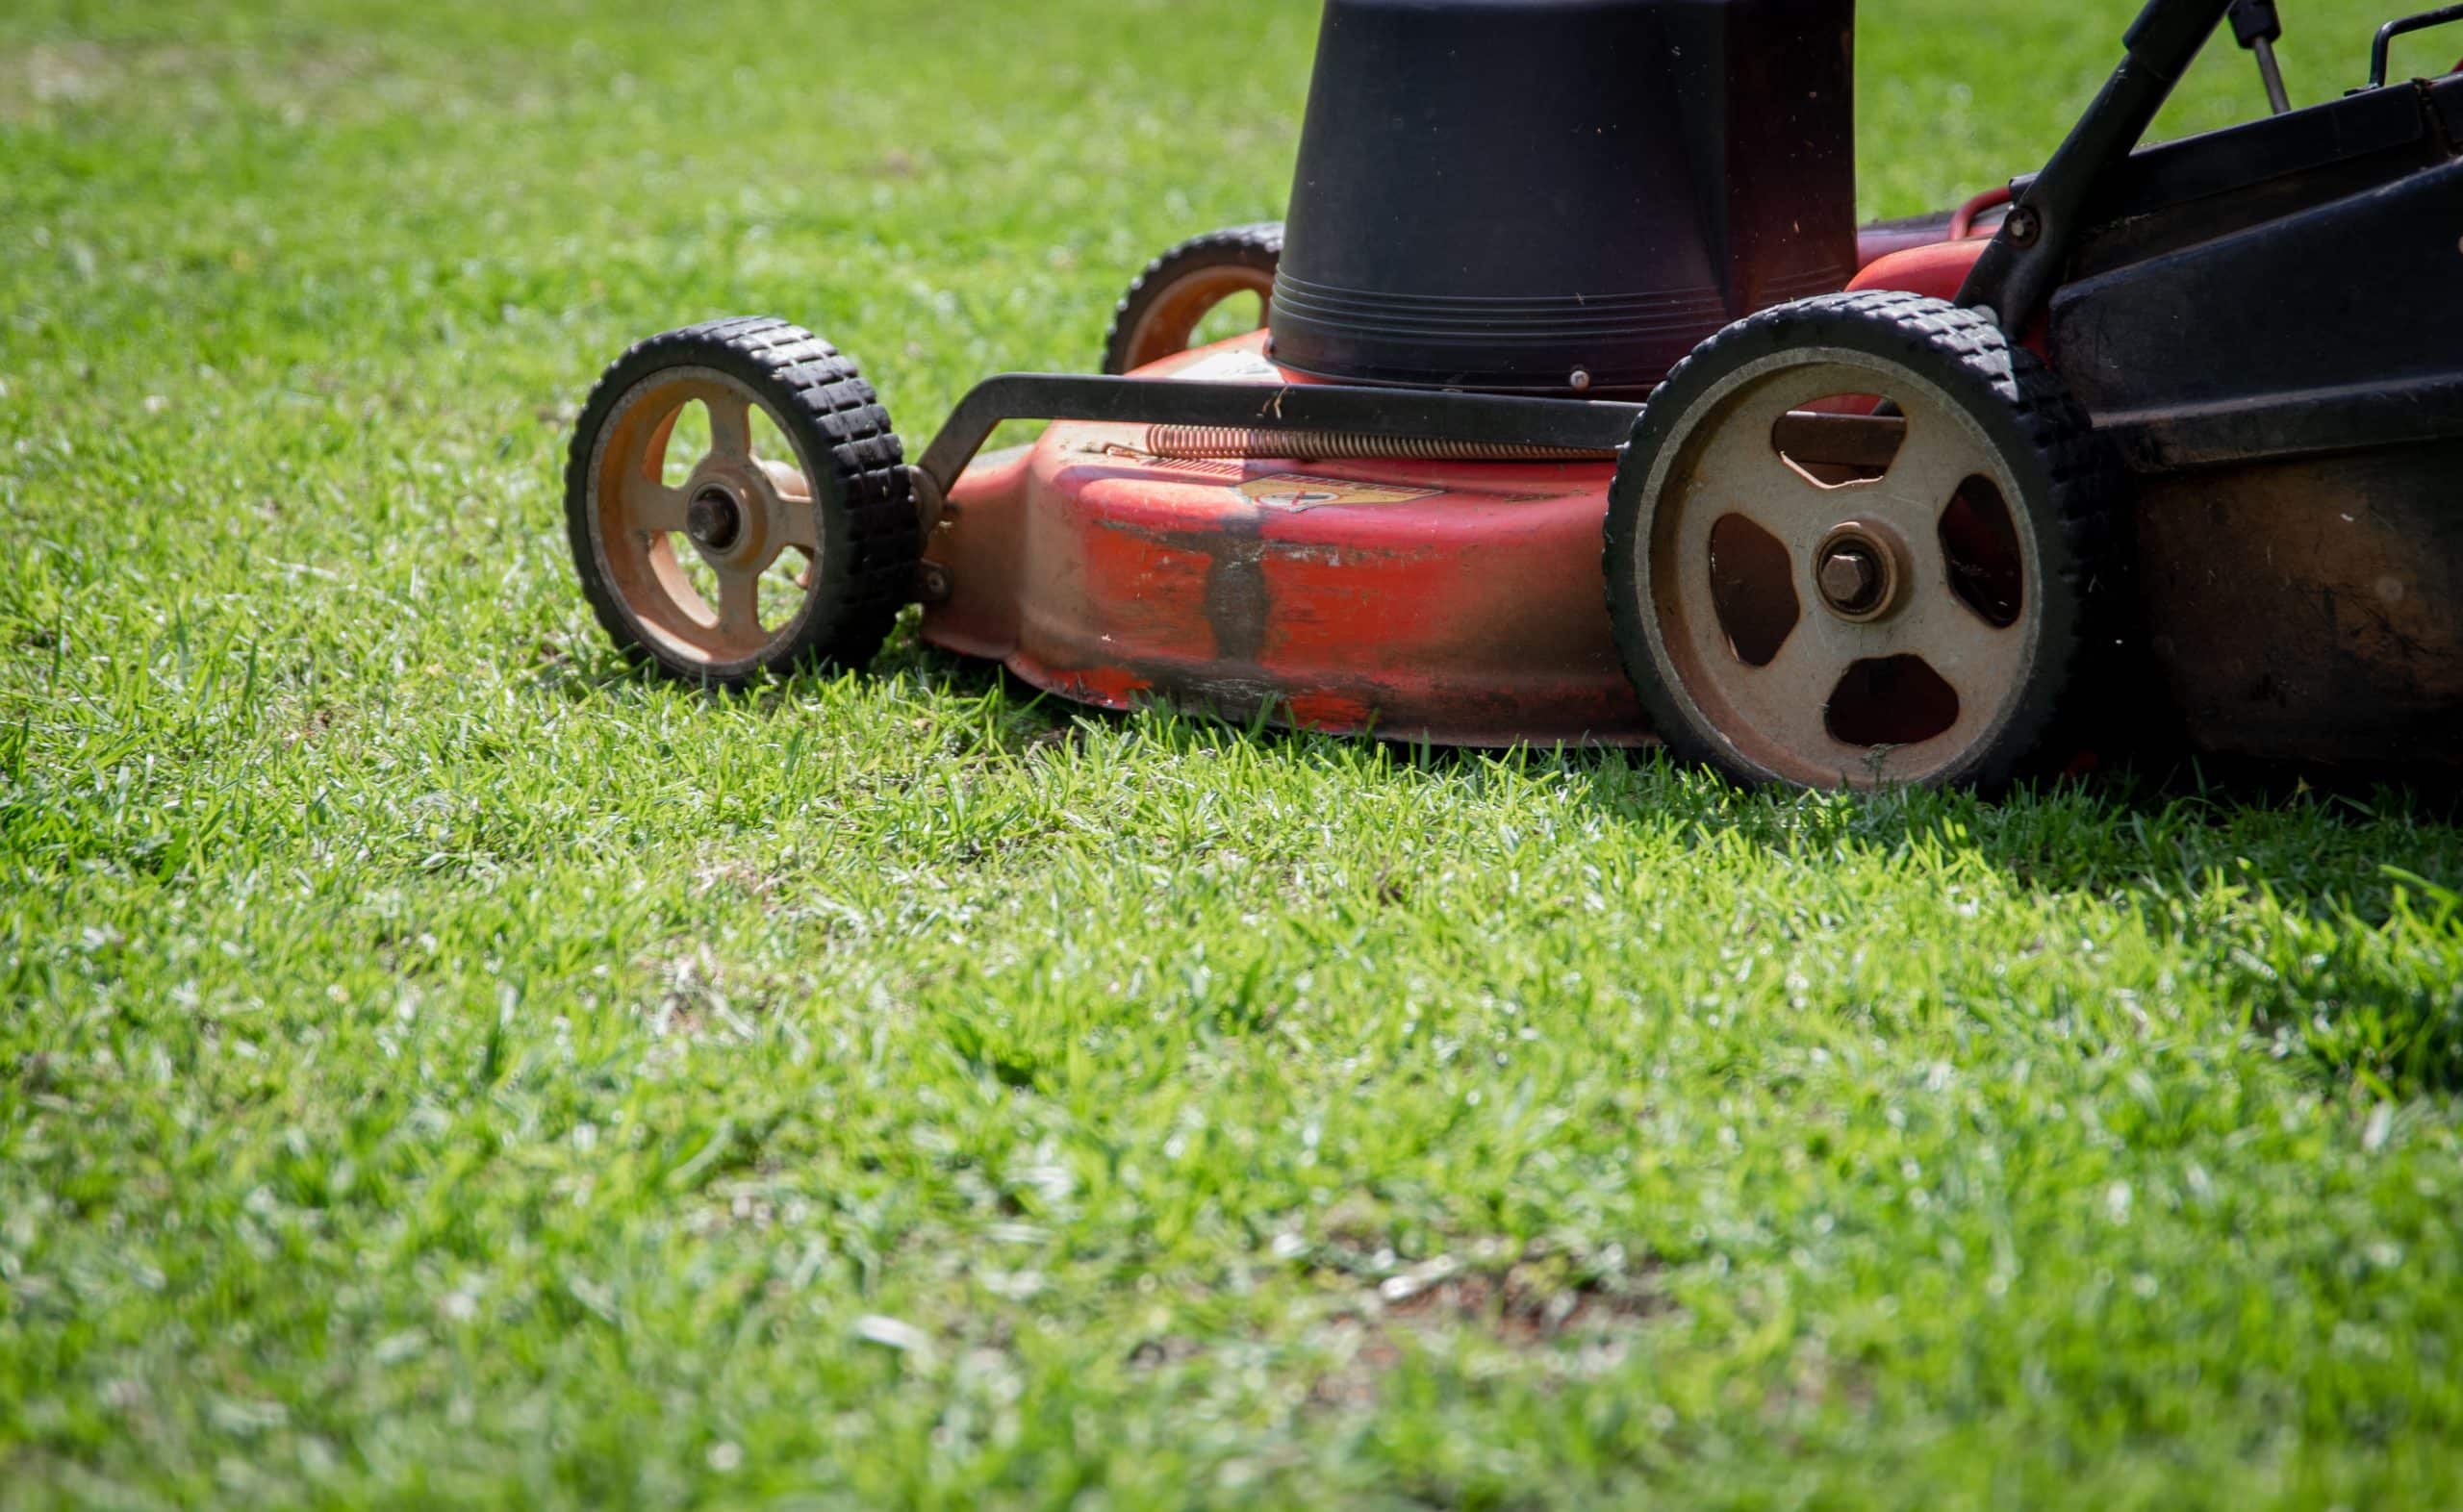 Scott's Lawn Care answers the question "When's the Best Time to Mow Your Lawn" with a photo of a push lawn mower moving across short grass.